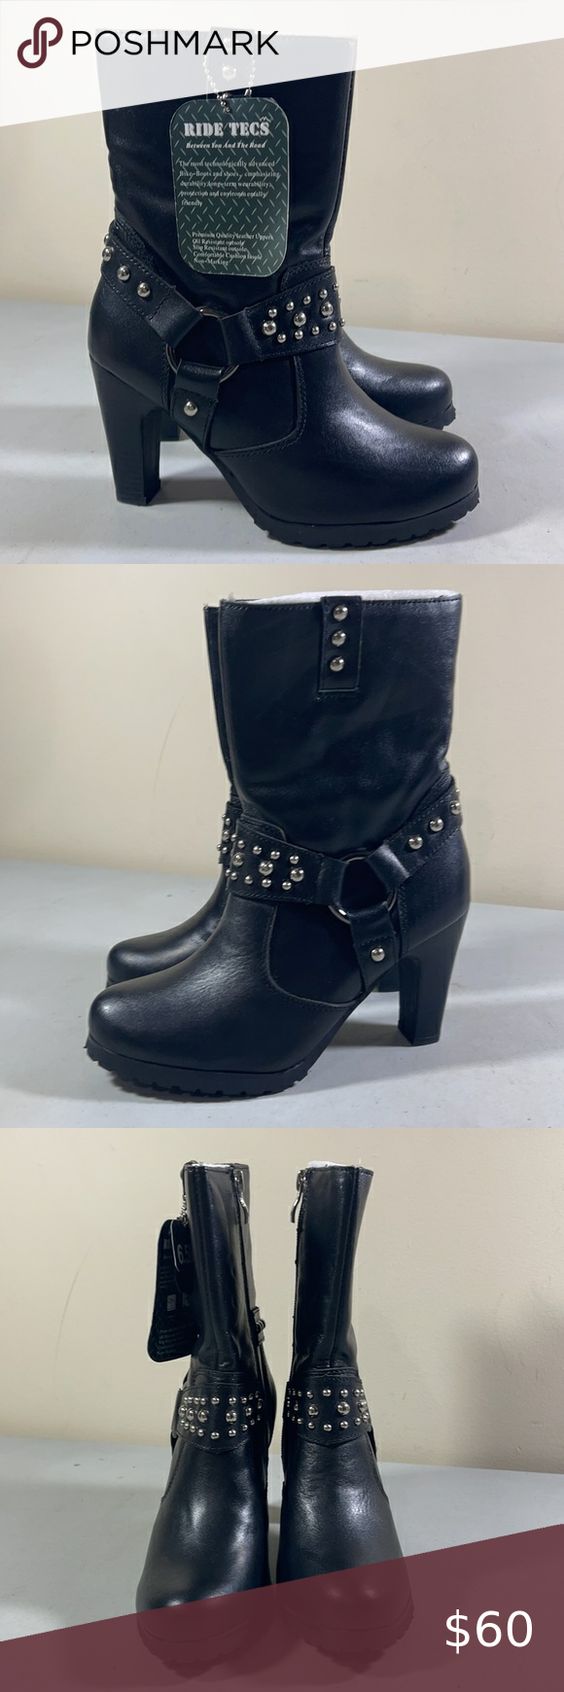 Ladies Studded Harness Boot